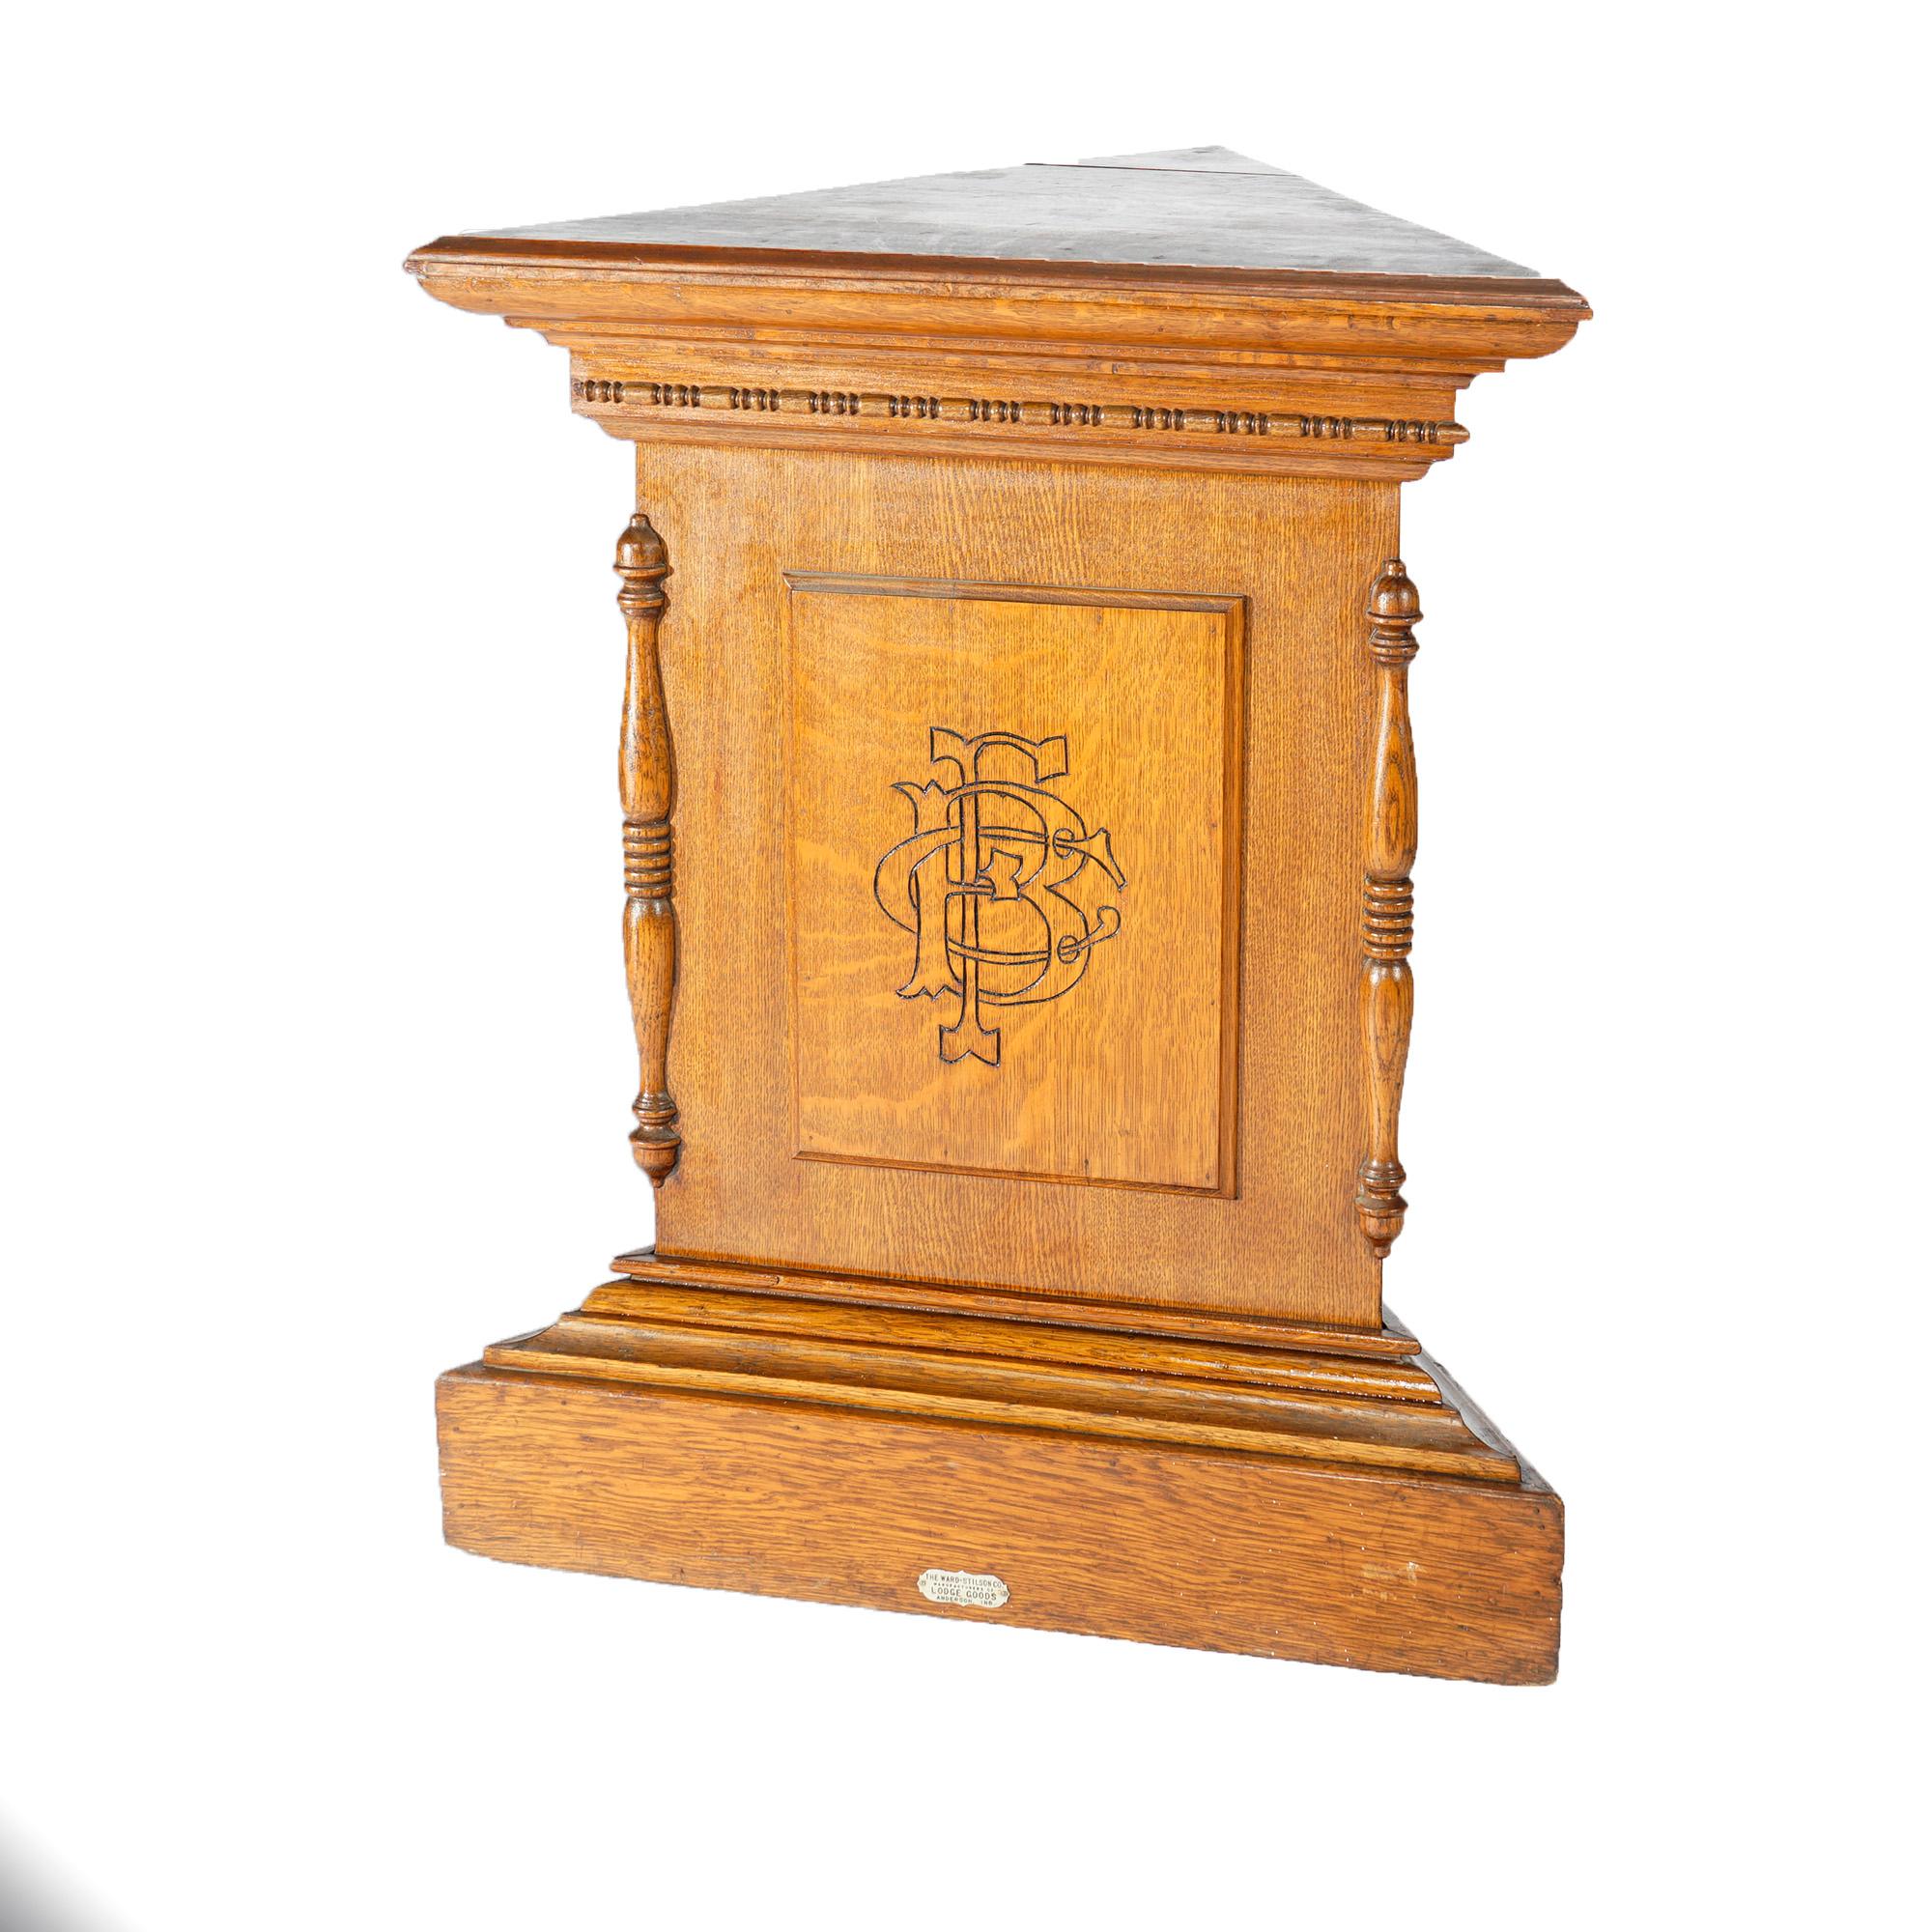 An antique Masonic pedestal by Ward-Stilson Co offers quarter sawn oak construction in triangular form with display platform over paneled and stepped base, monogrammed and maker plaque as photographed, c1900

Measures- 32''H x 22.5''W x 22.5''D;